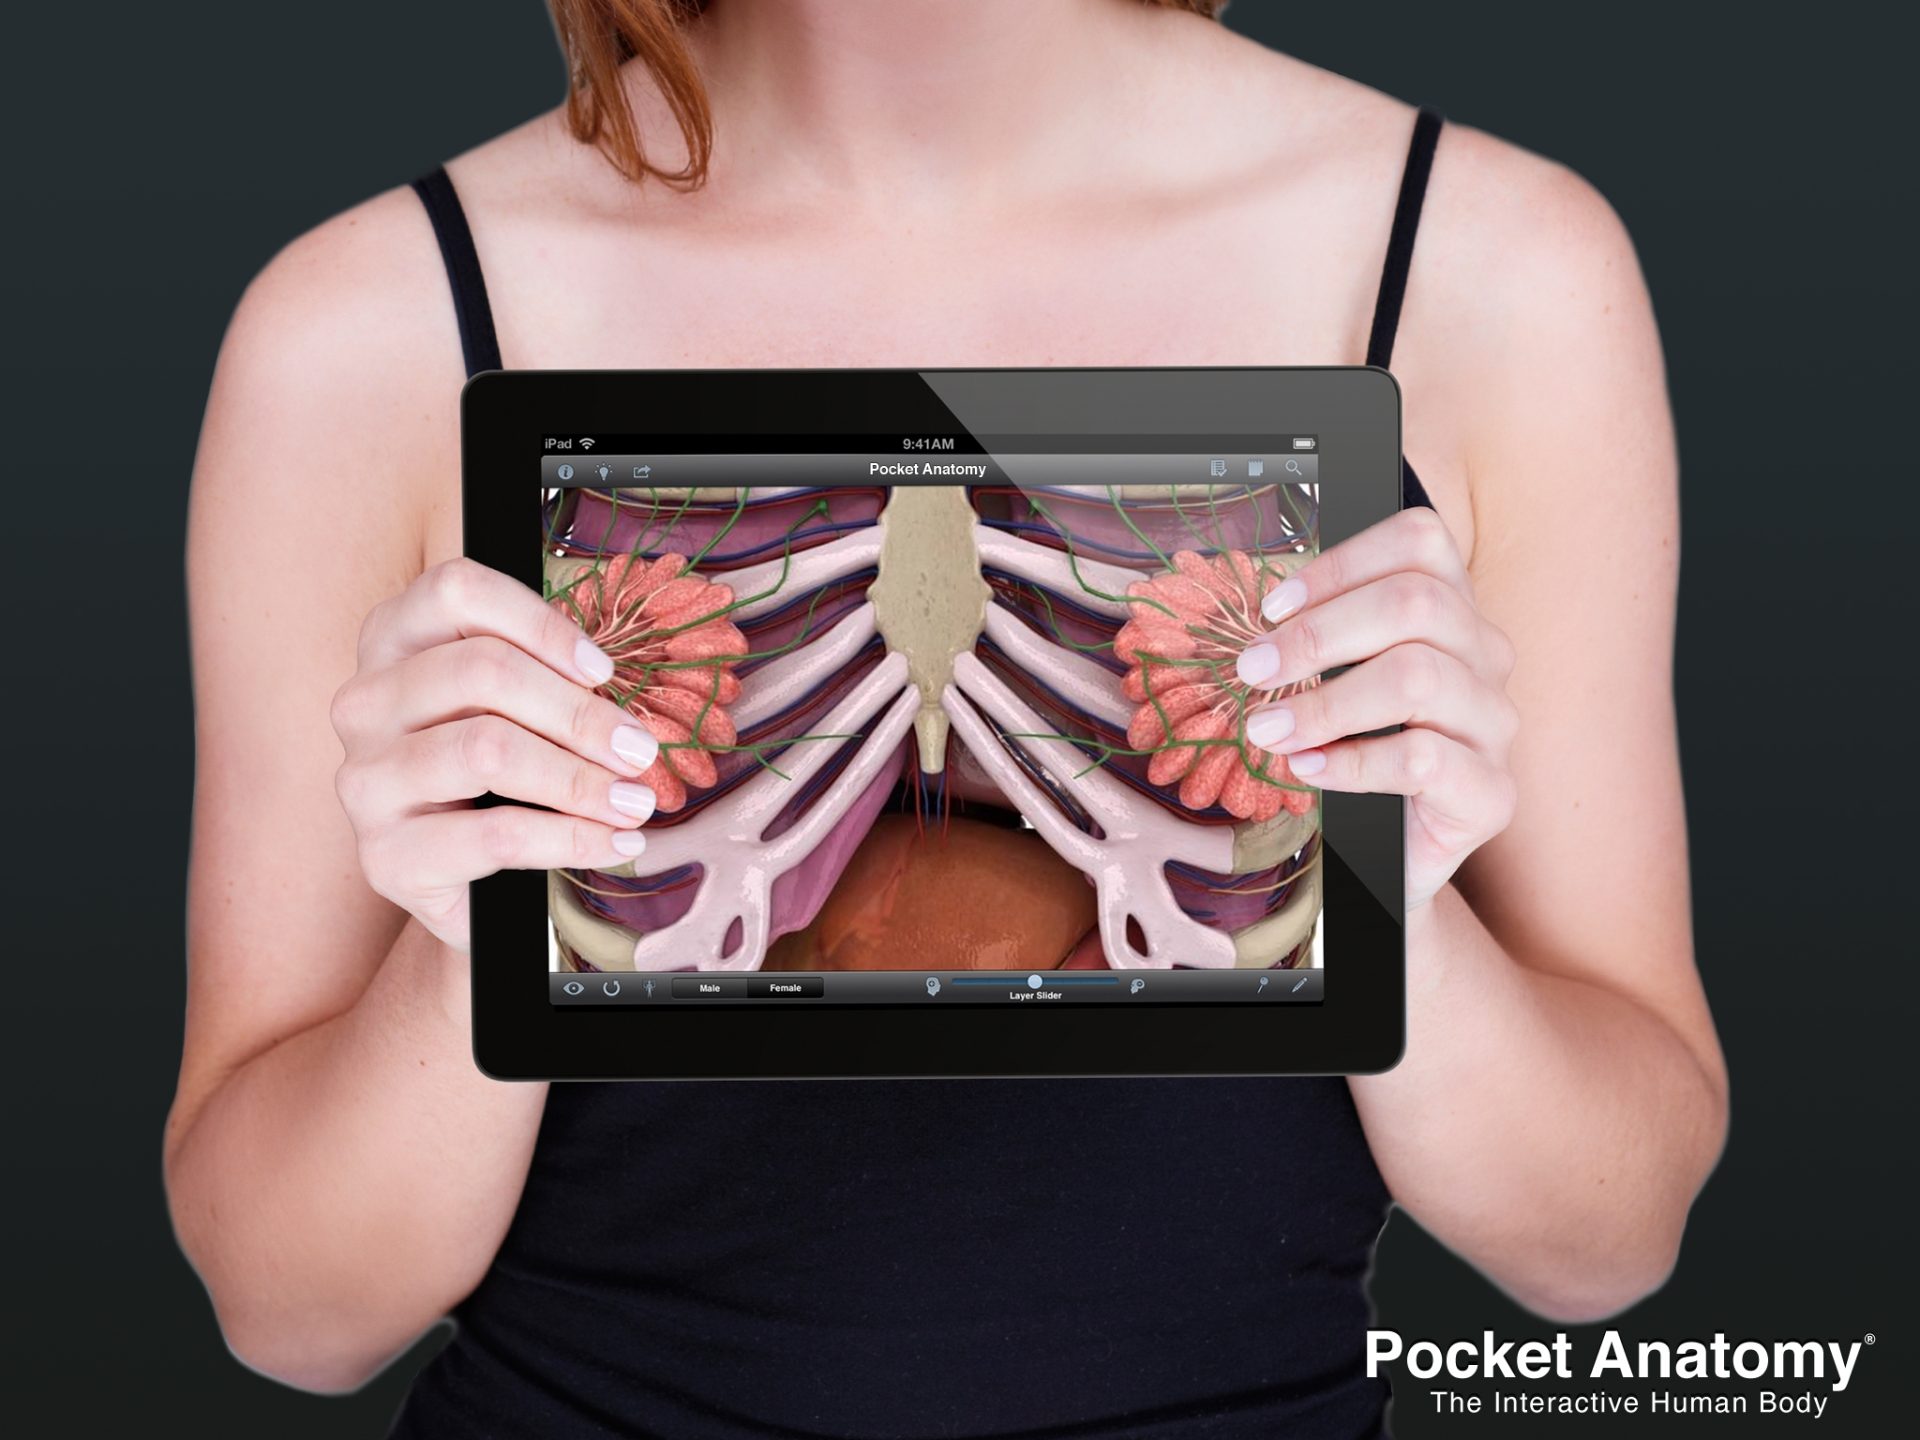 New Pocket Anatomy App Launches to Help Massage Therapists and Students, MASSAGE Magazine